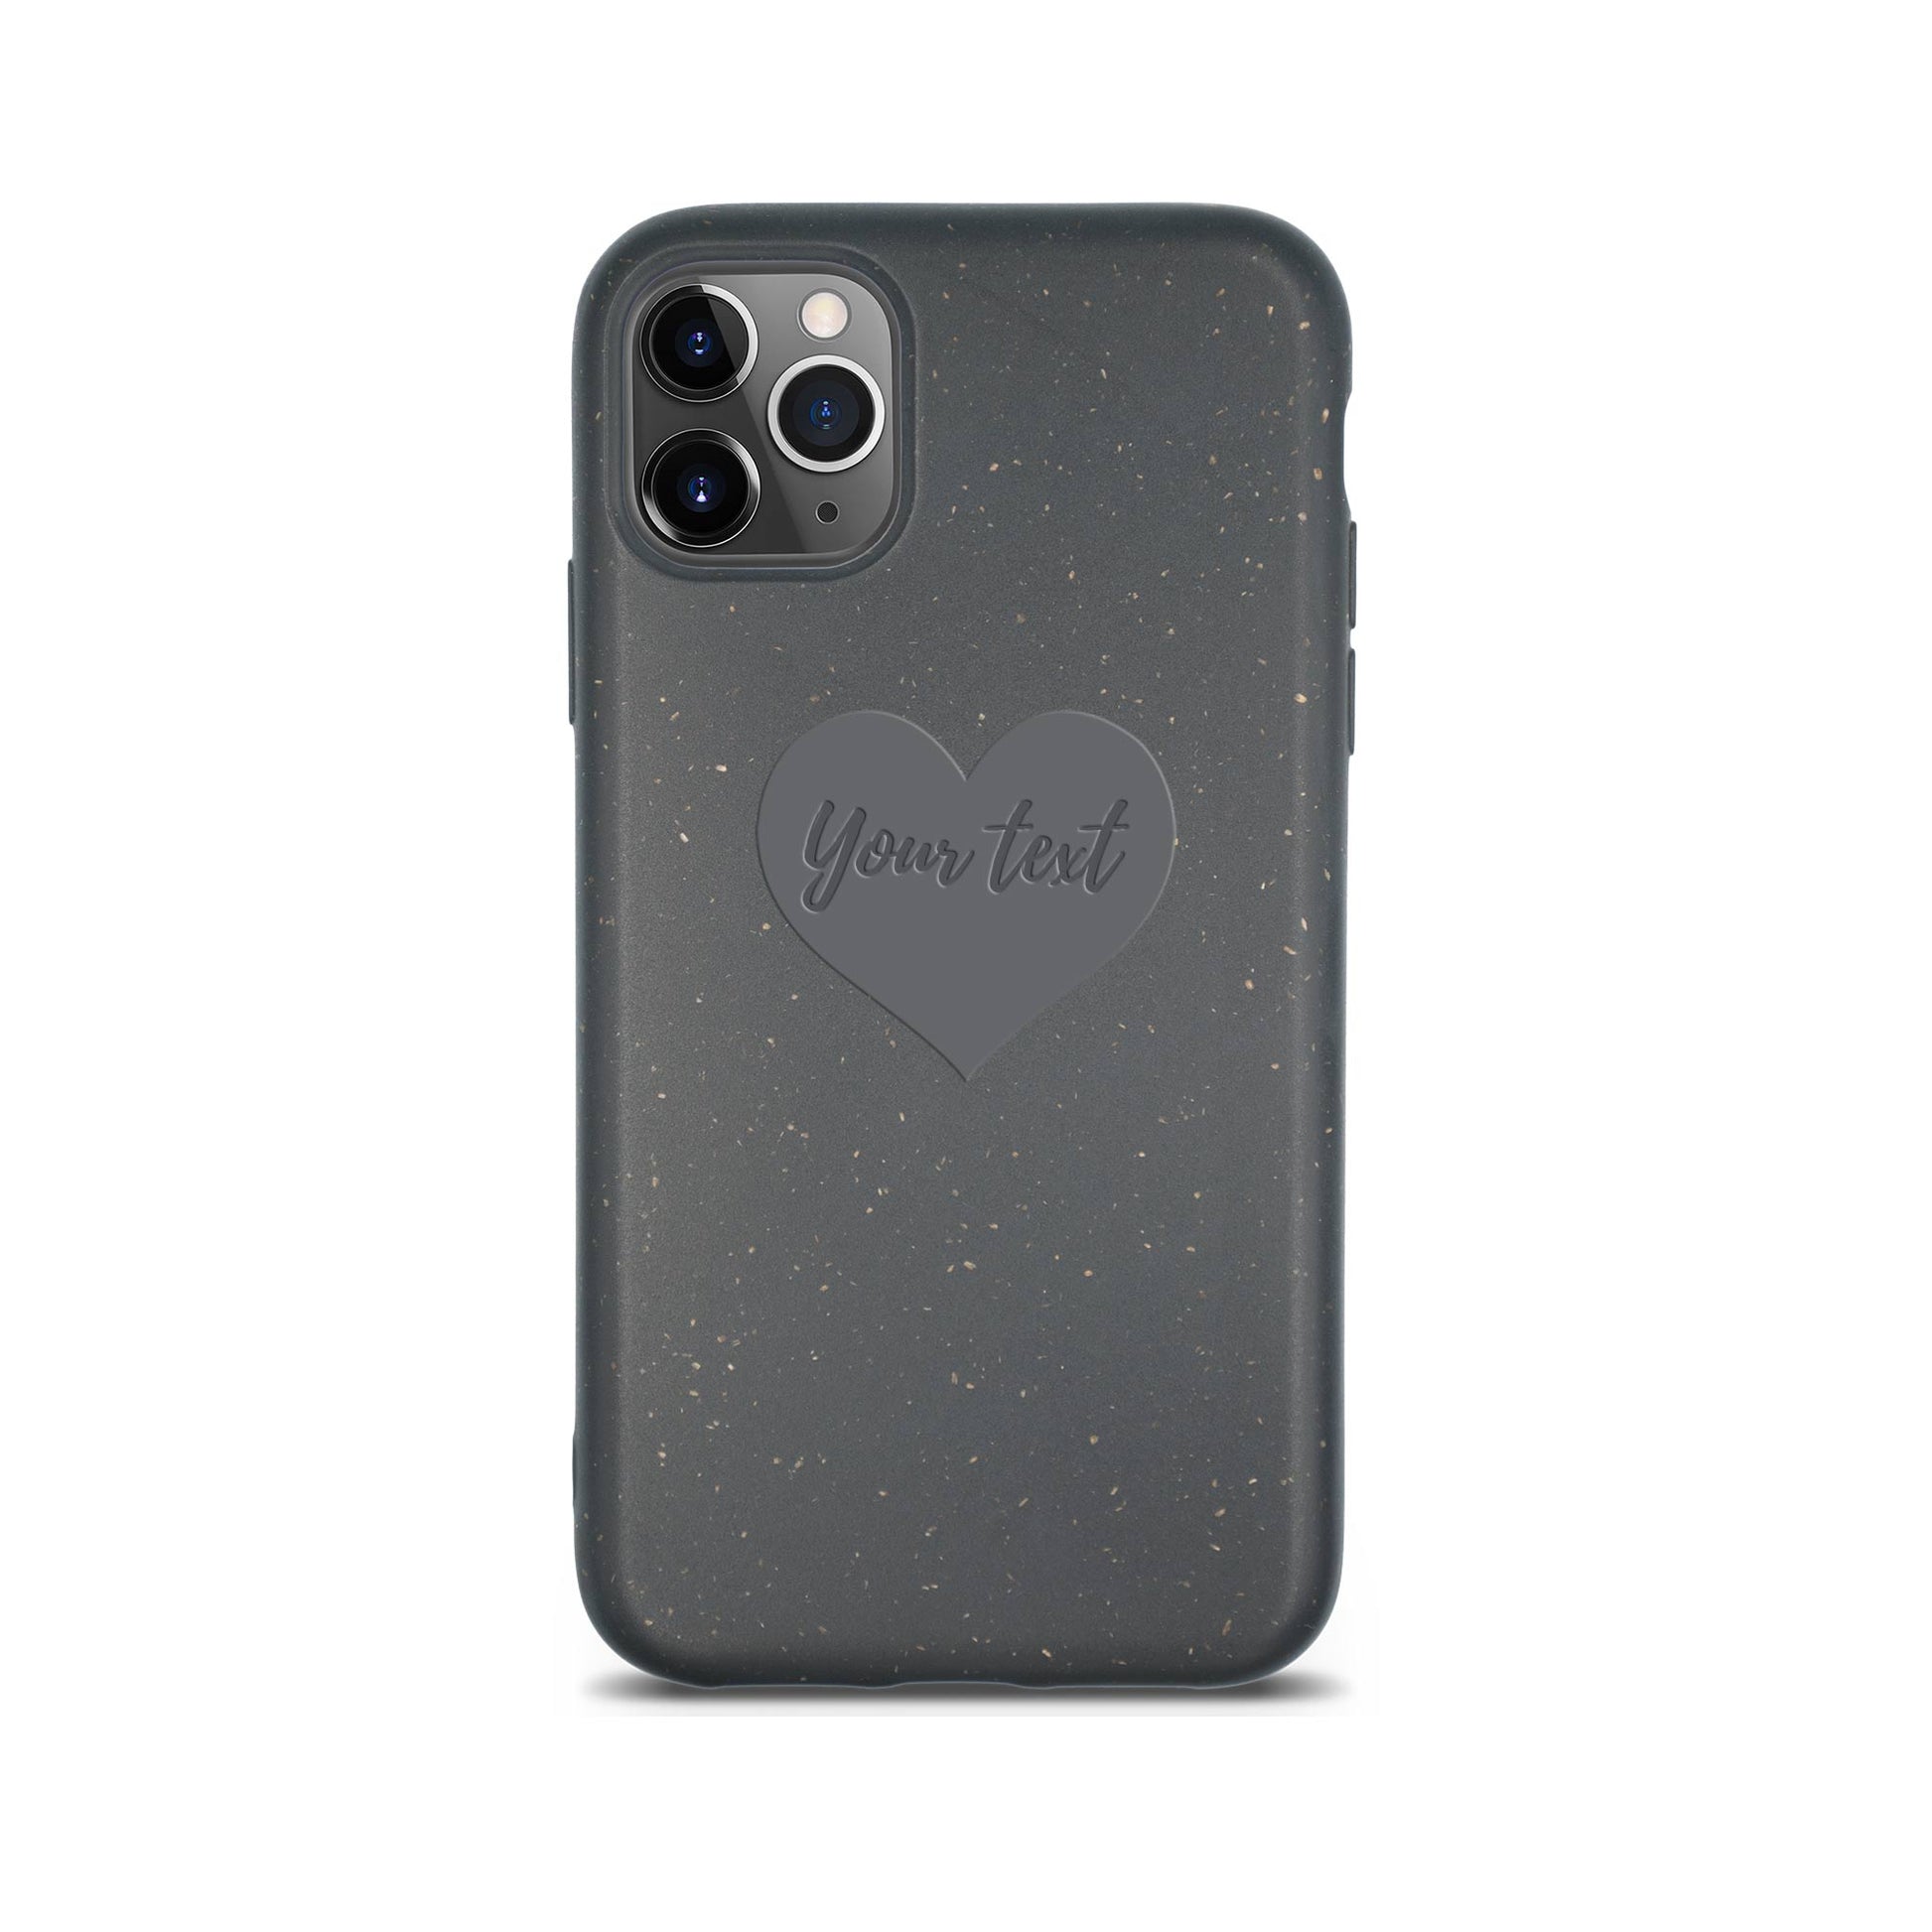 Black iPhone case with a heart-shaped "Your text" logo, compatible with a three-camera phone, isolated on a white background. This personalized Tan Lily phone case adds a unique touch to your device.